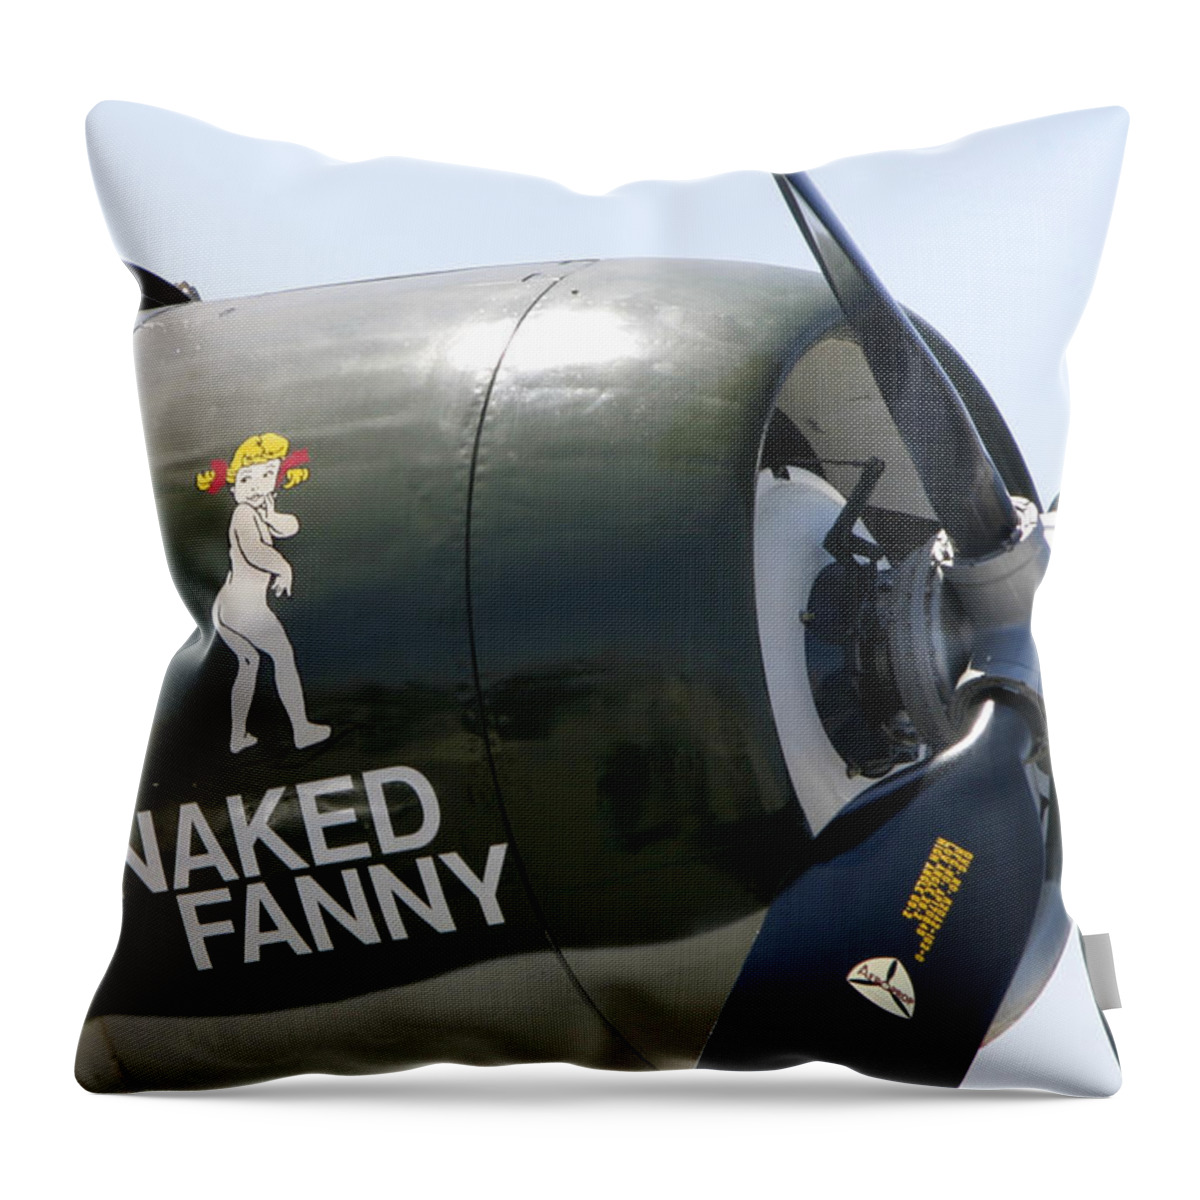 Plane Throw Pillow featuring the photograph Naked Fanny by Anthony Jones